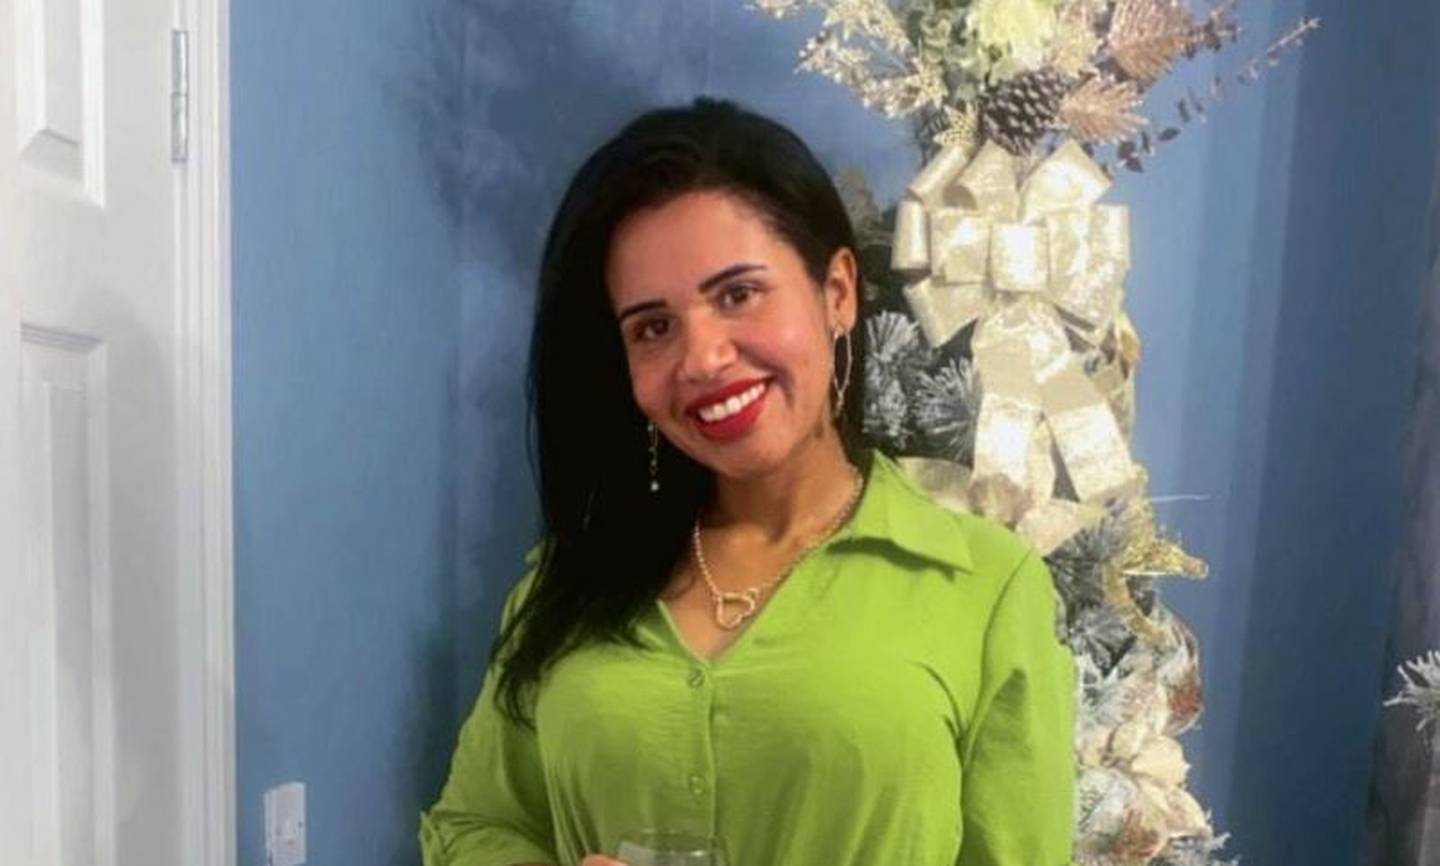 Criscielle Nascimento (33), who underwent weight-loss surgery in Turkey, having arranged the procedure before her brother died.